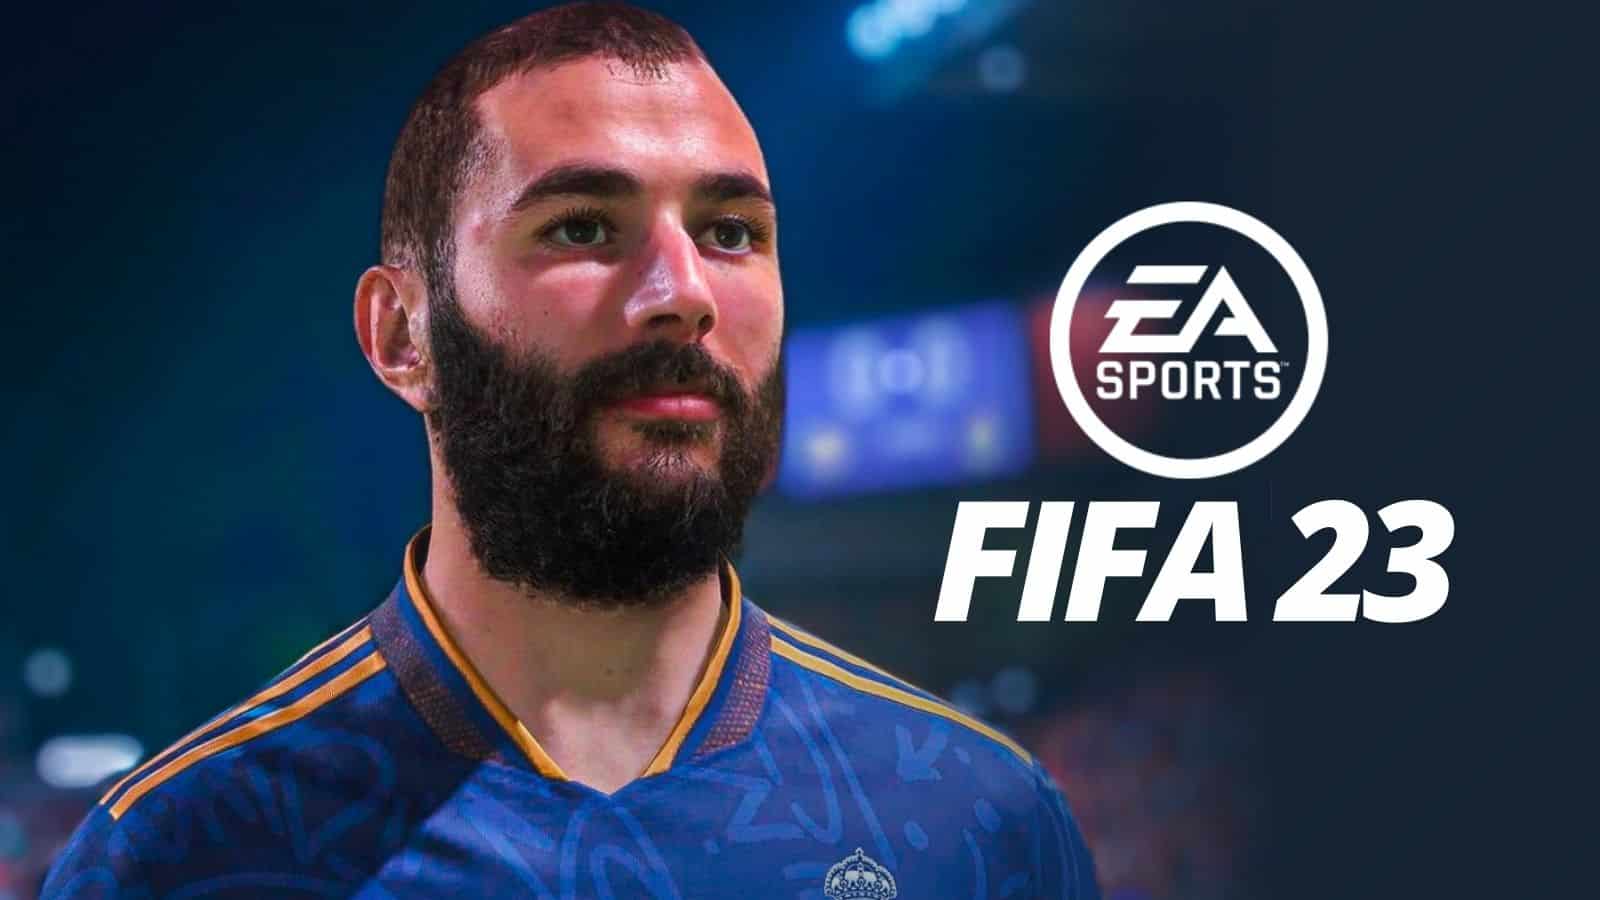 FIFA 23 pre-order guide: How to get 20% discount, prices & editions -  Dexerto